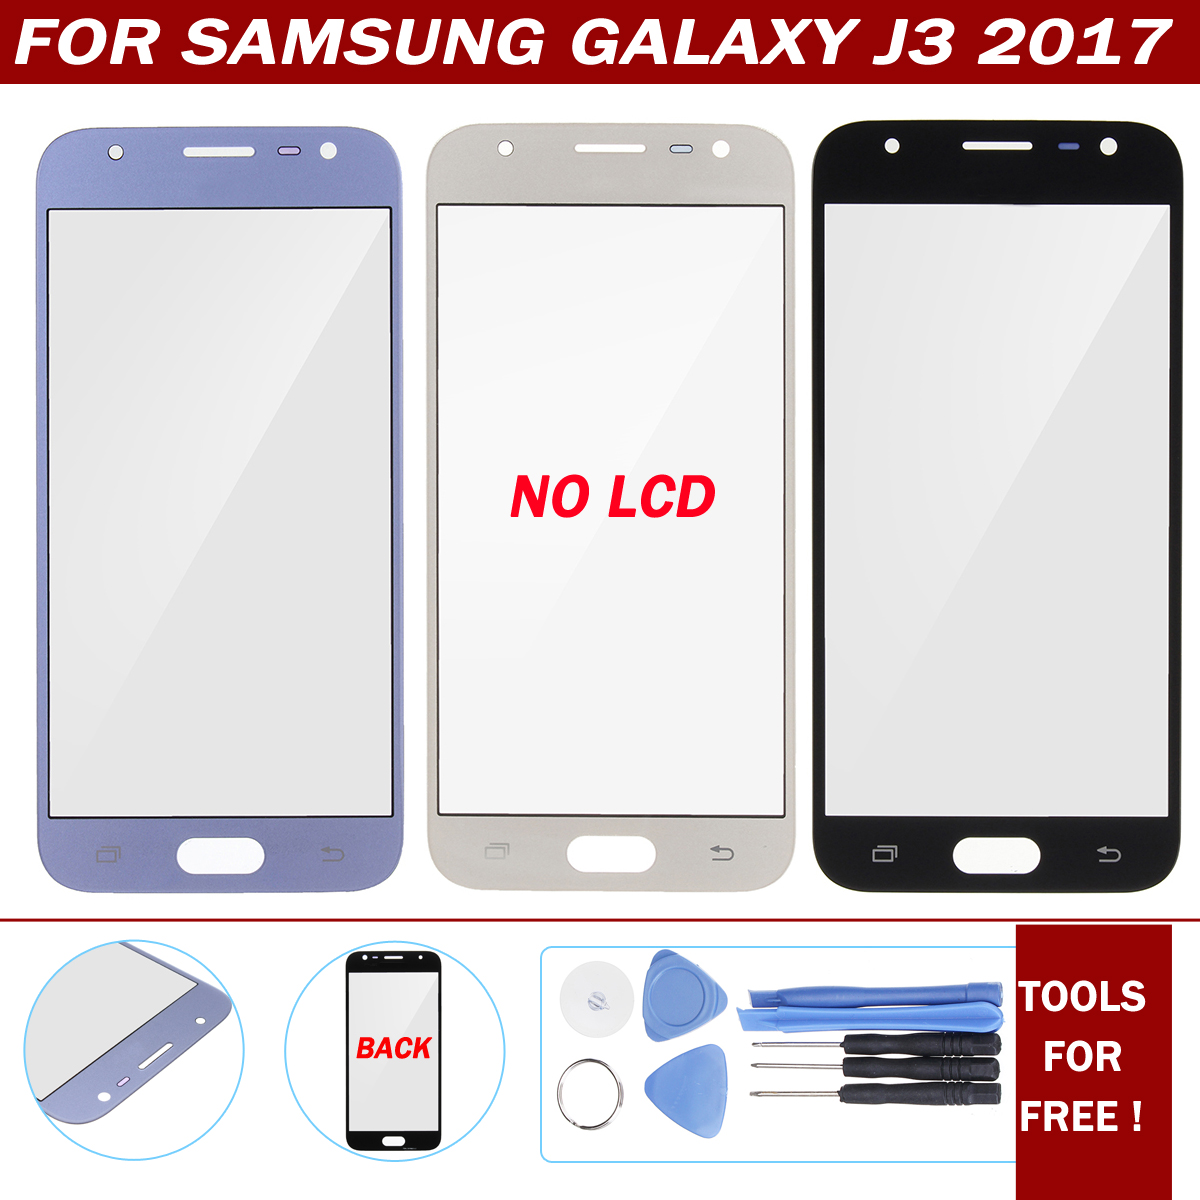 Front-Glass-Touch-Screen-Replacement-amp-Tools-Kit-for-Samsung-Galaxy-J3-2017-1330403